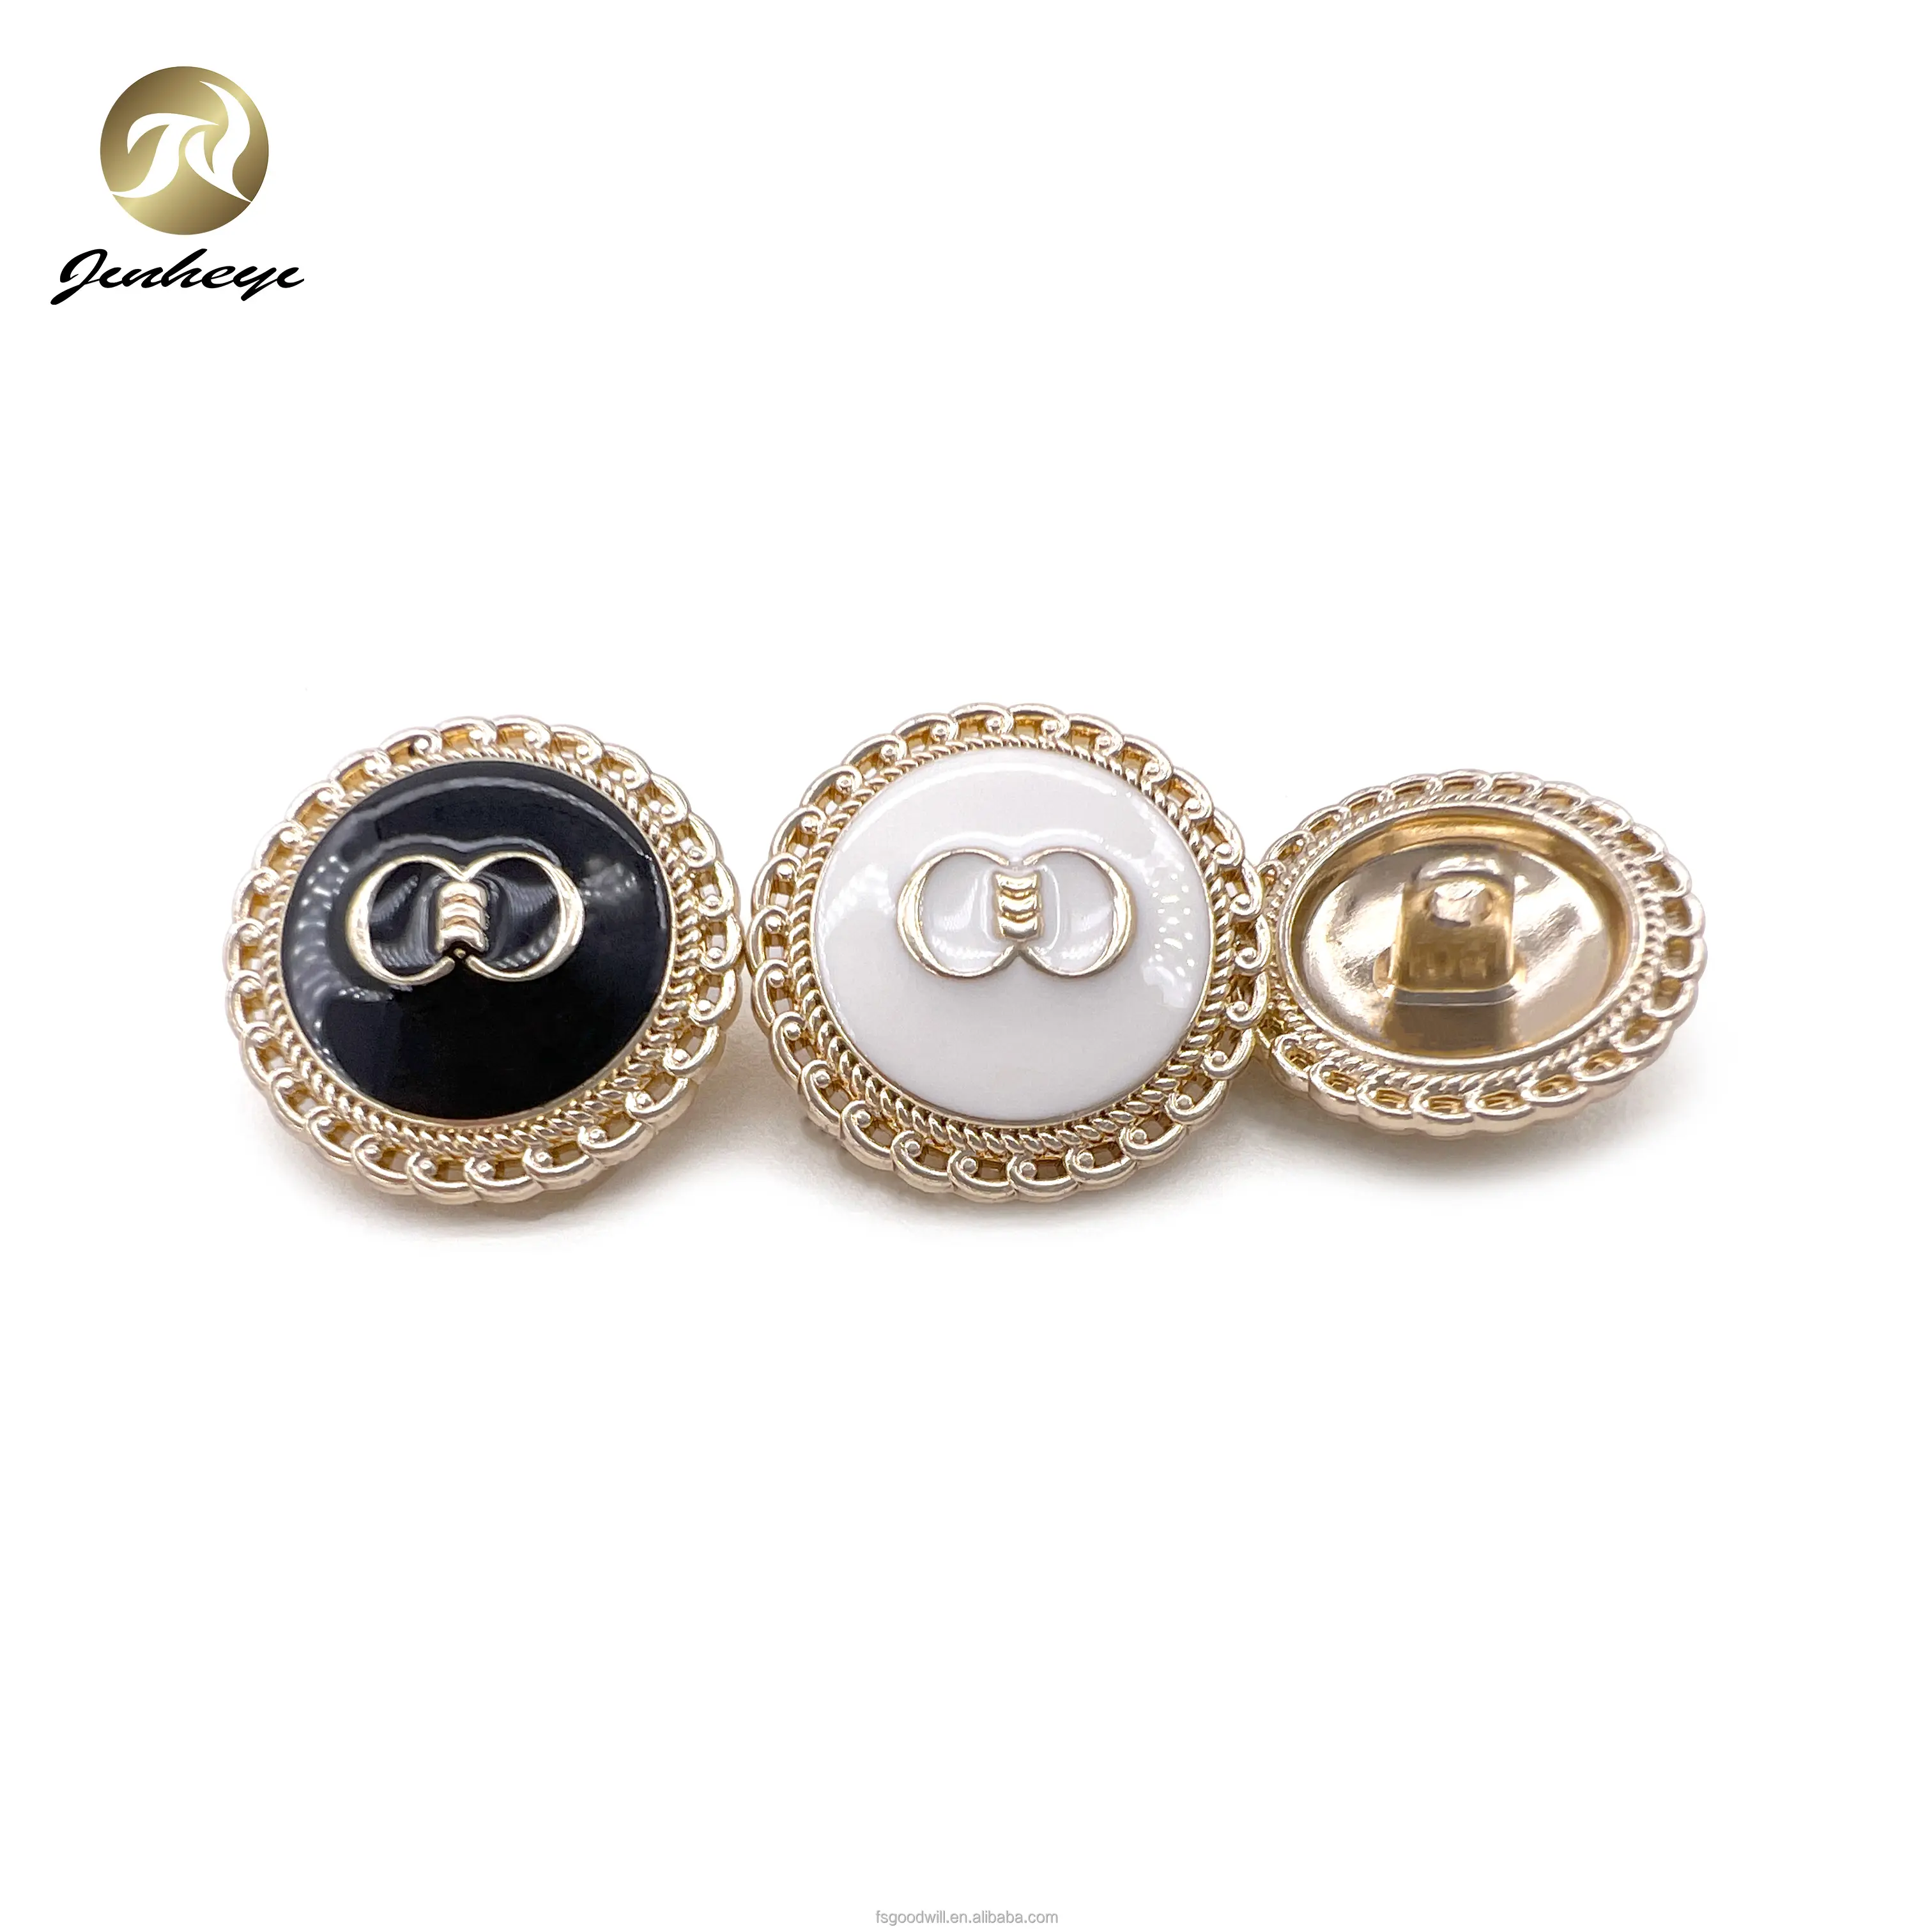 CC New Design Custom Personality 23 MM Gold Suit Metal Enamel Buttons Luxury Fashion Shank Coat Buttons